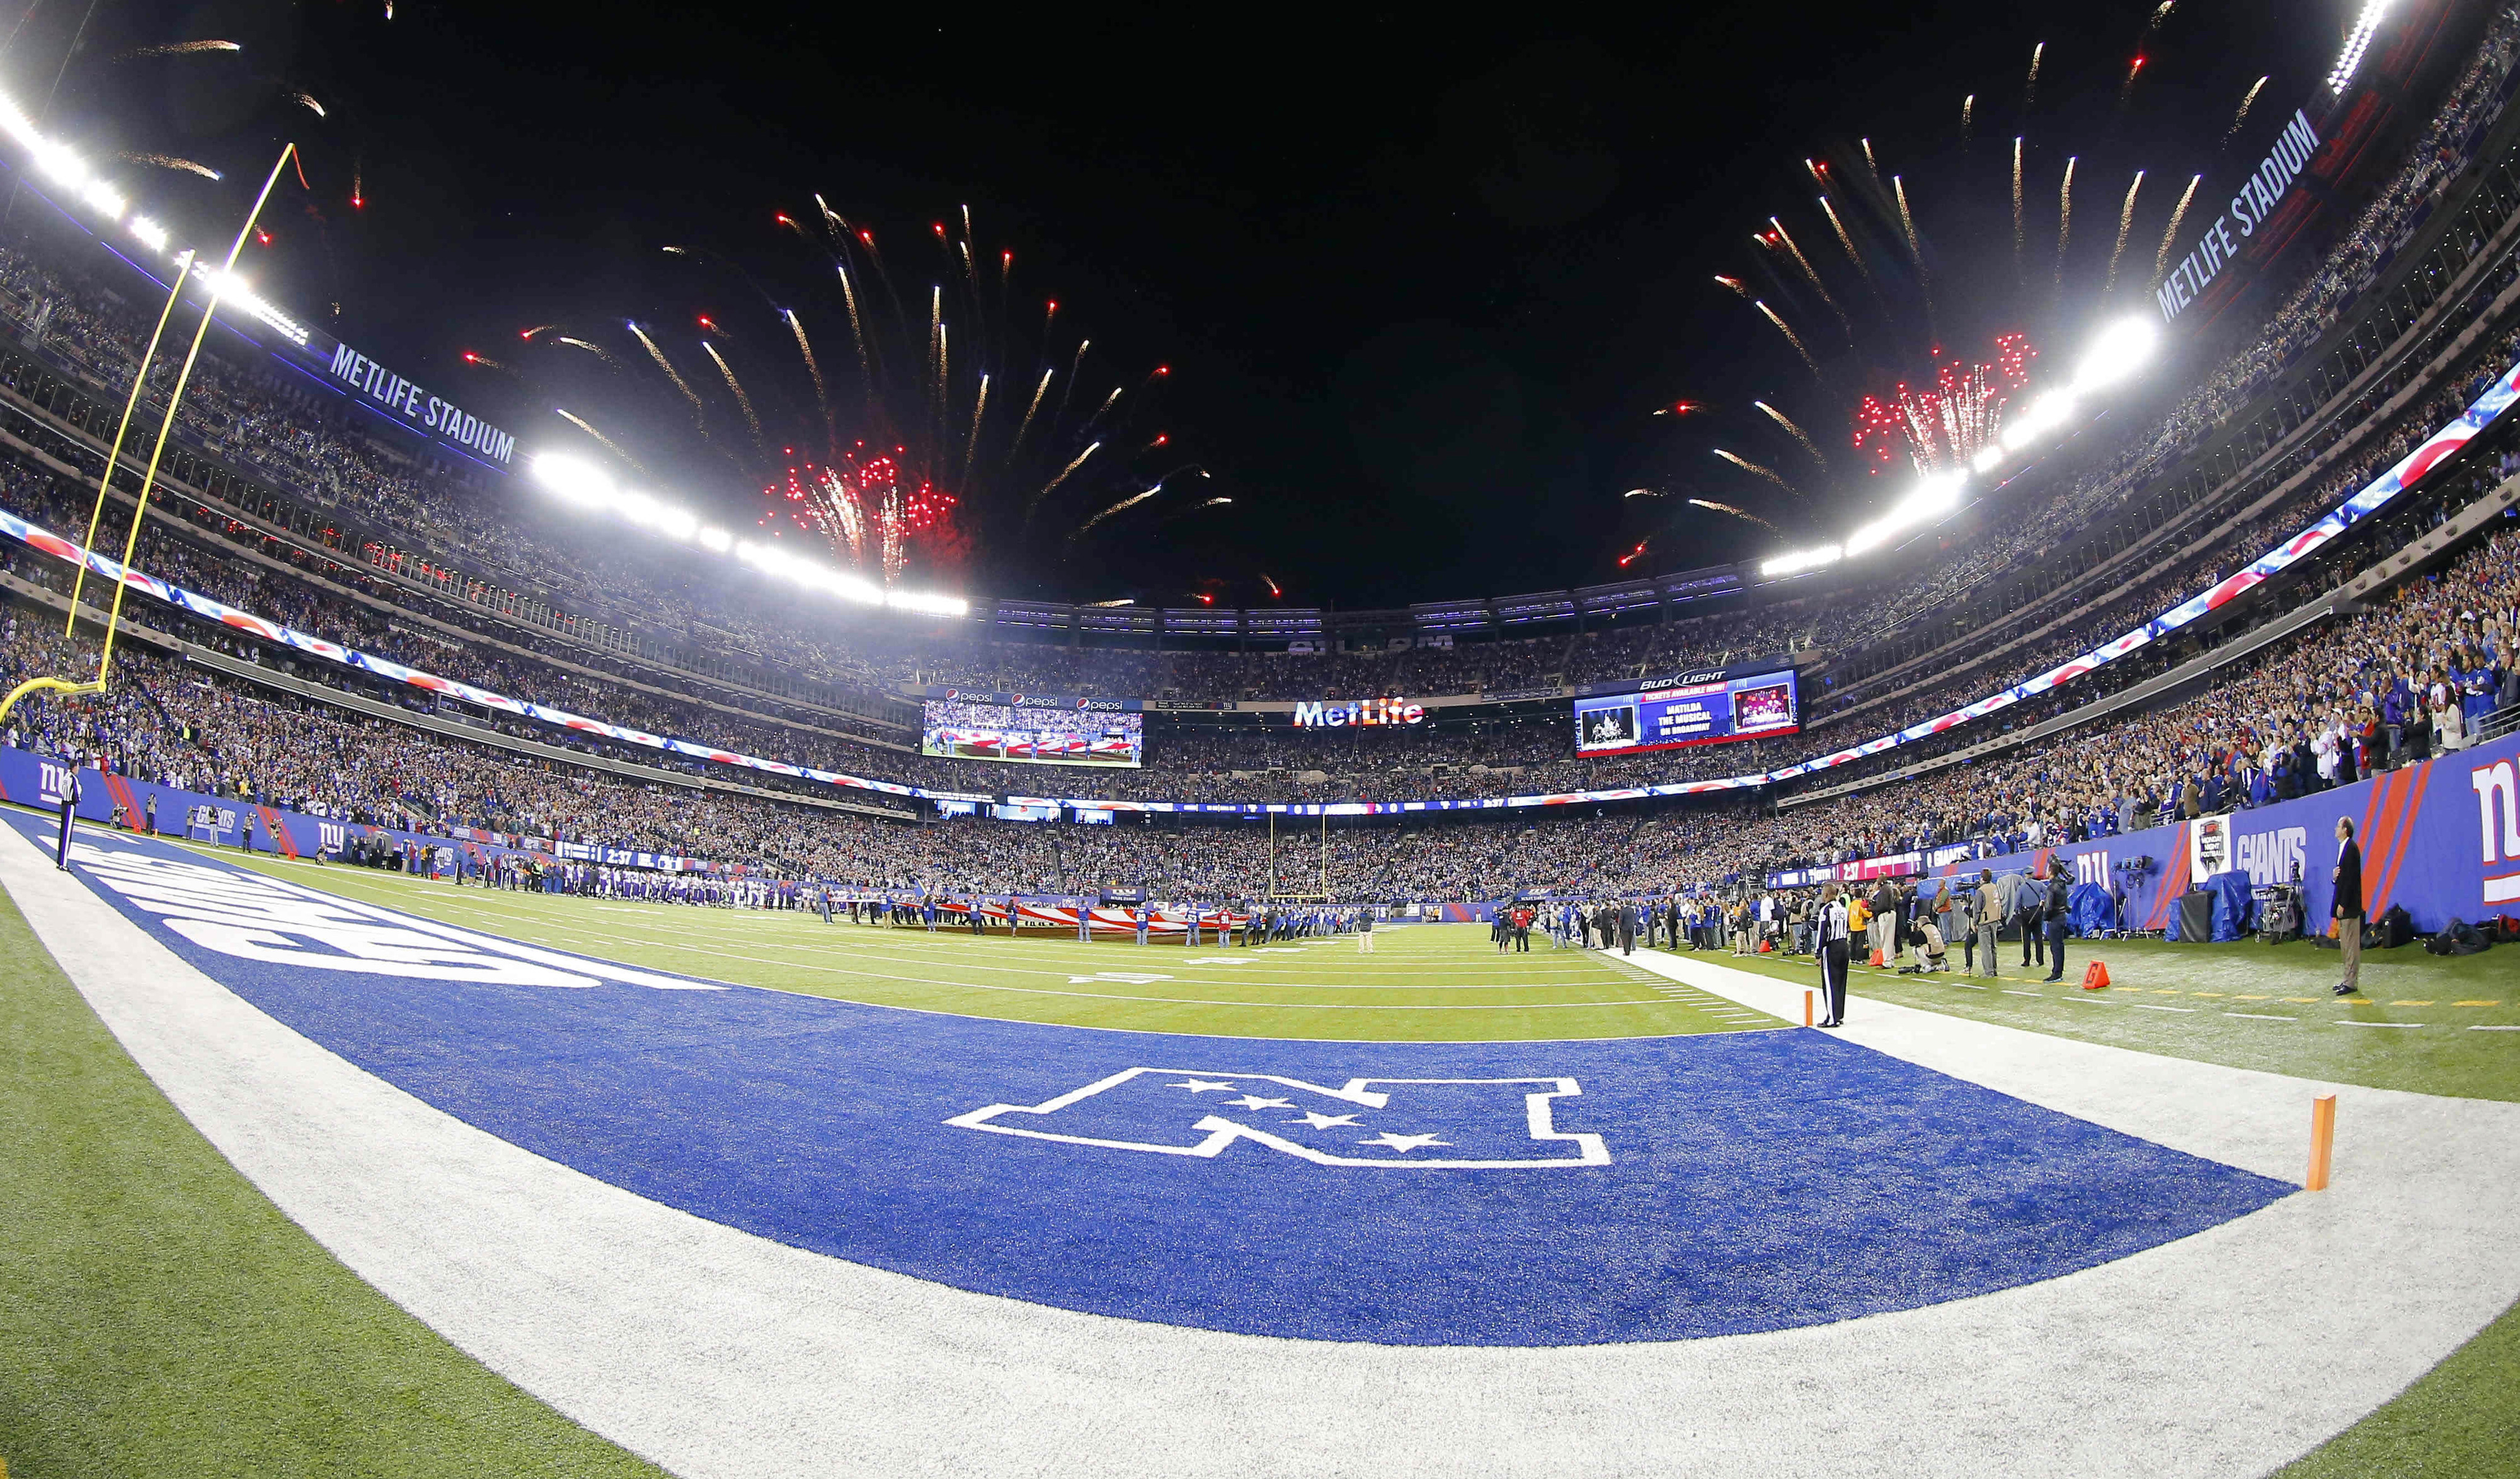 Can the Giants create some NFC East fireworks?